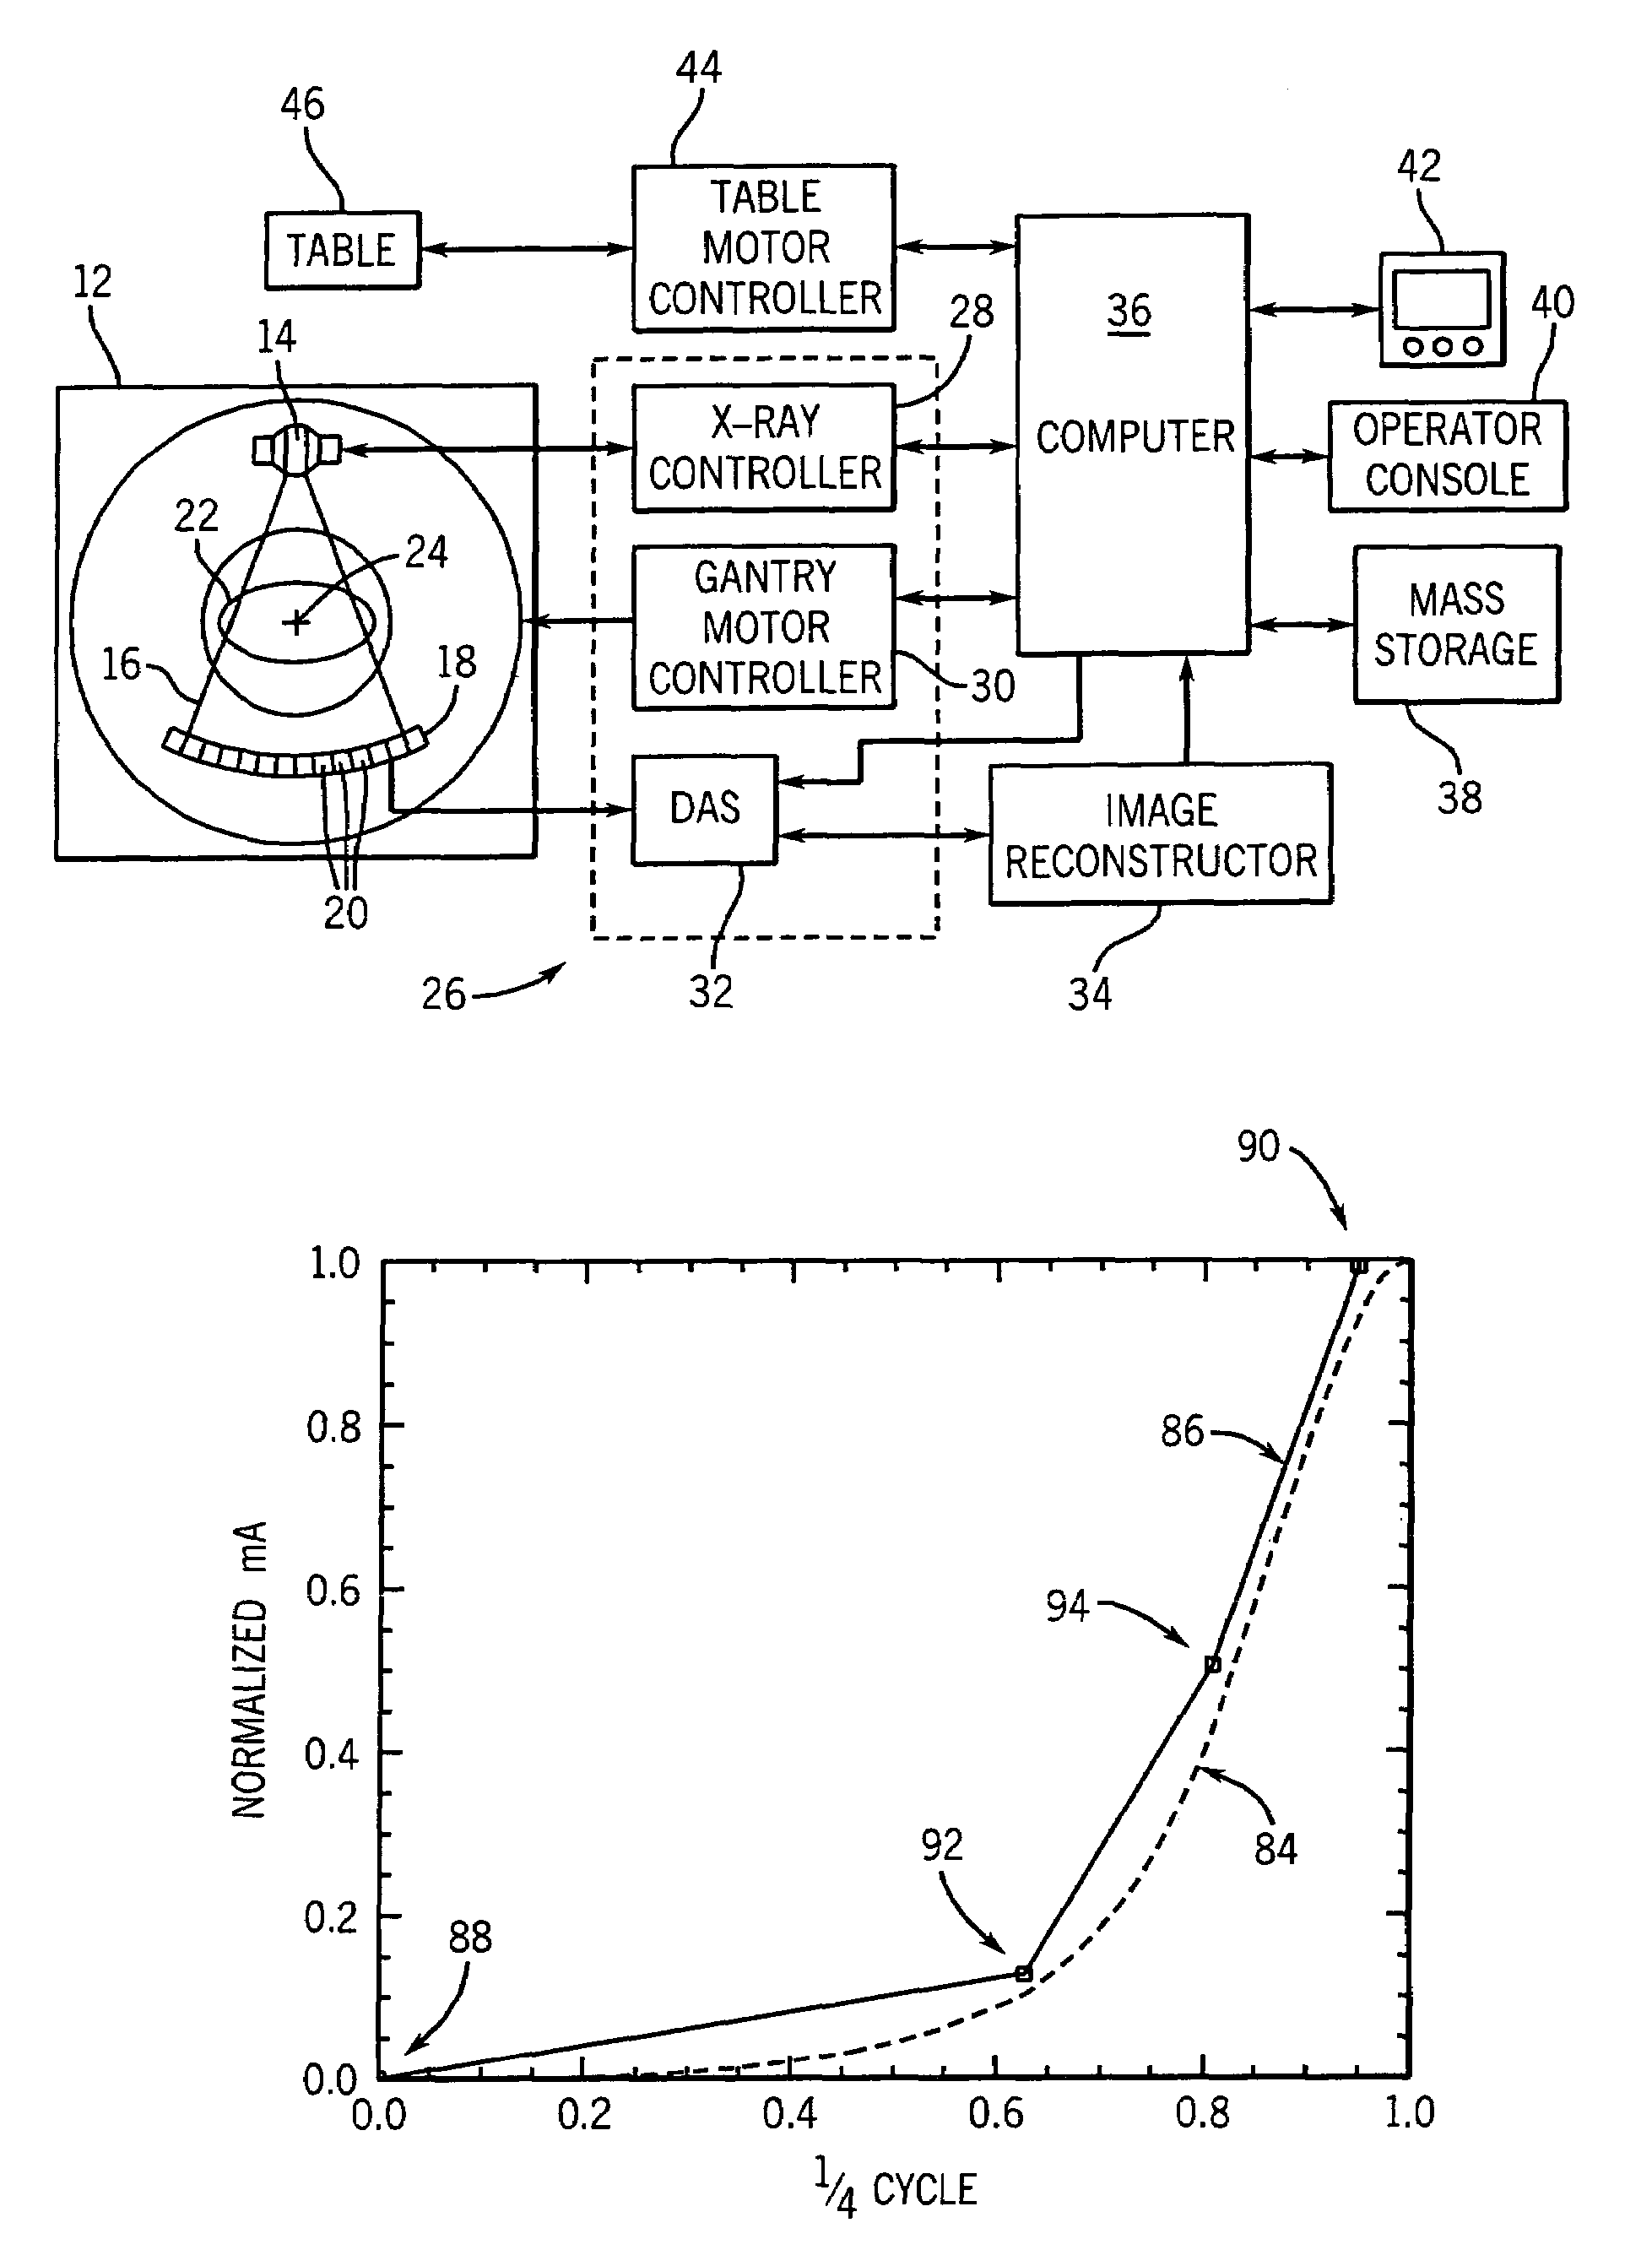 Method and apparatus to determine tube current modulation profile for radiographic imaging